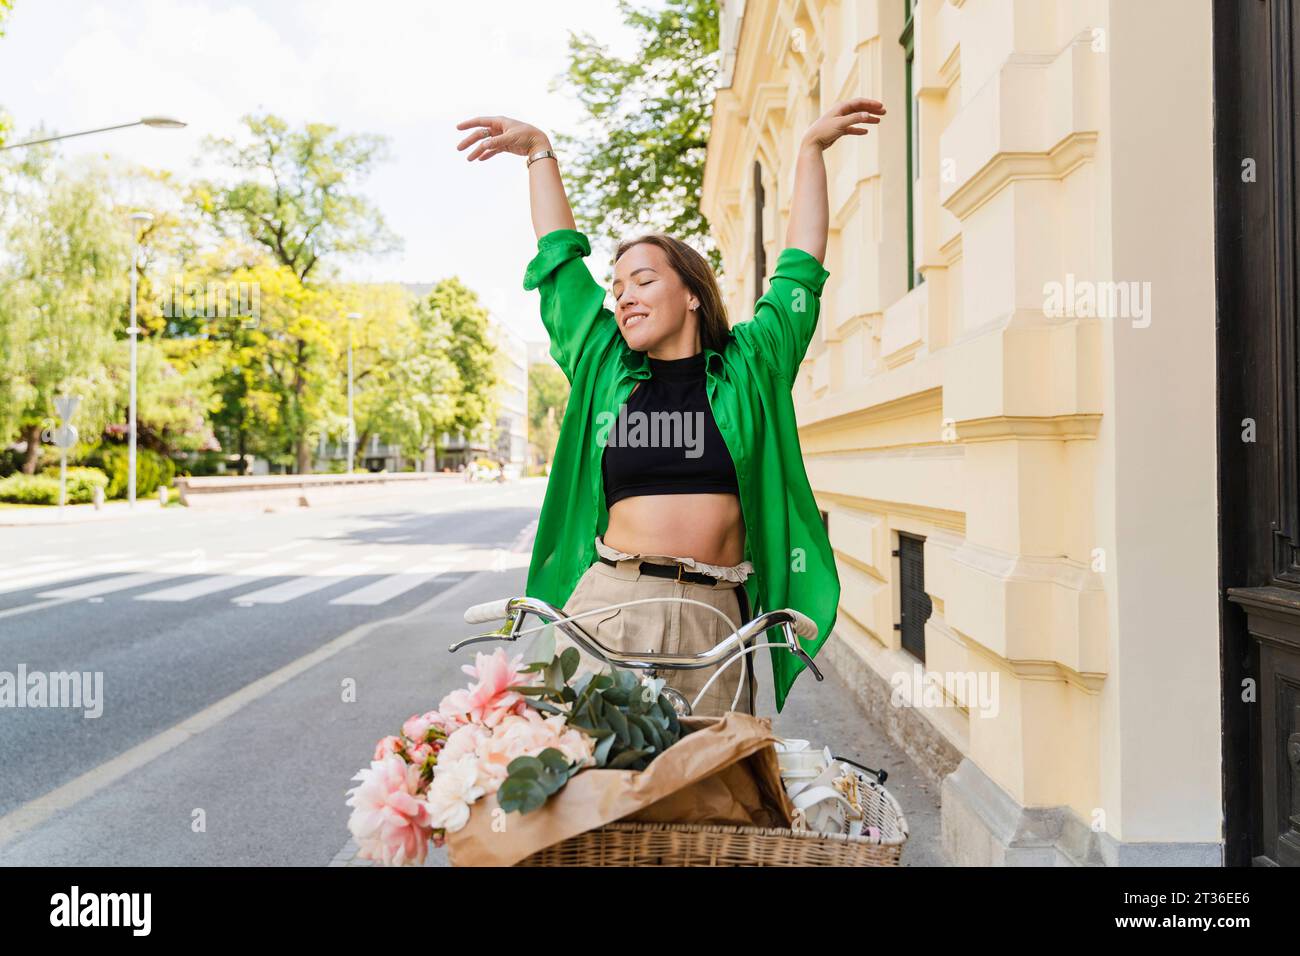 Happy woman with bicycle and arms raised on street Stock Photo